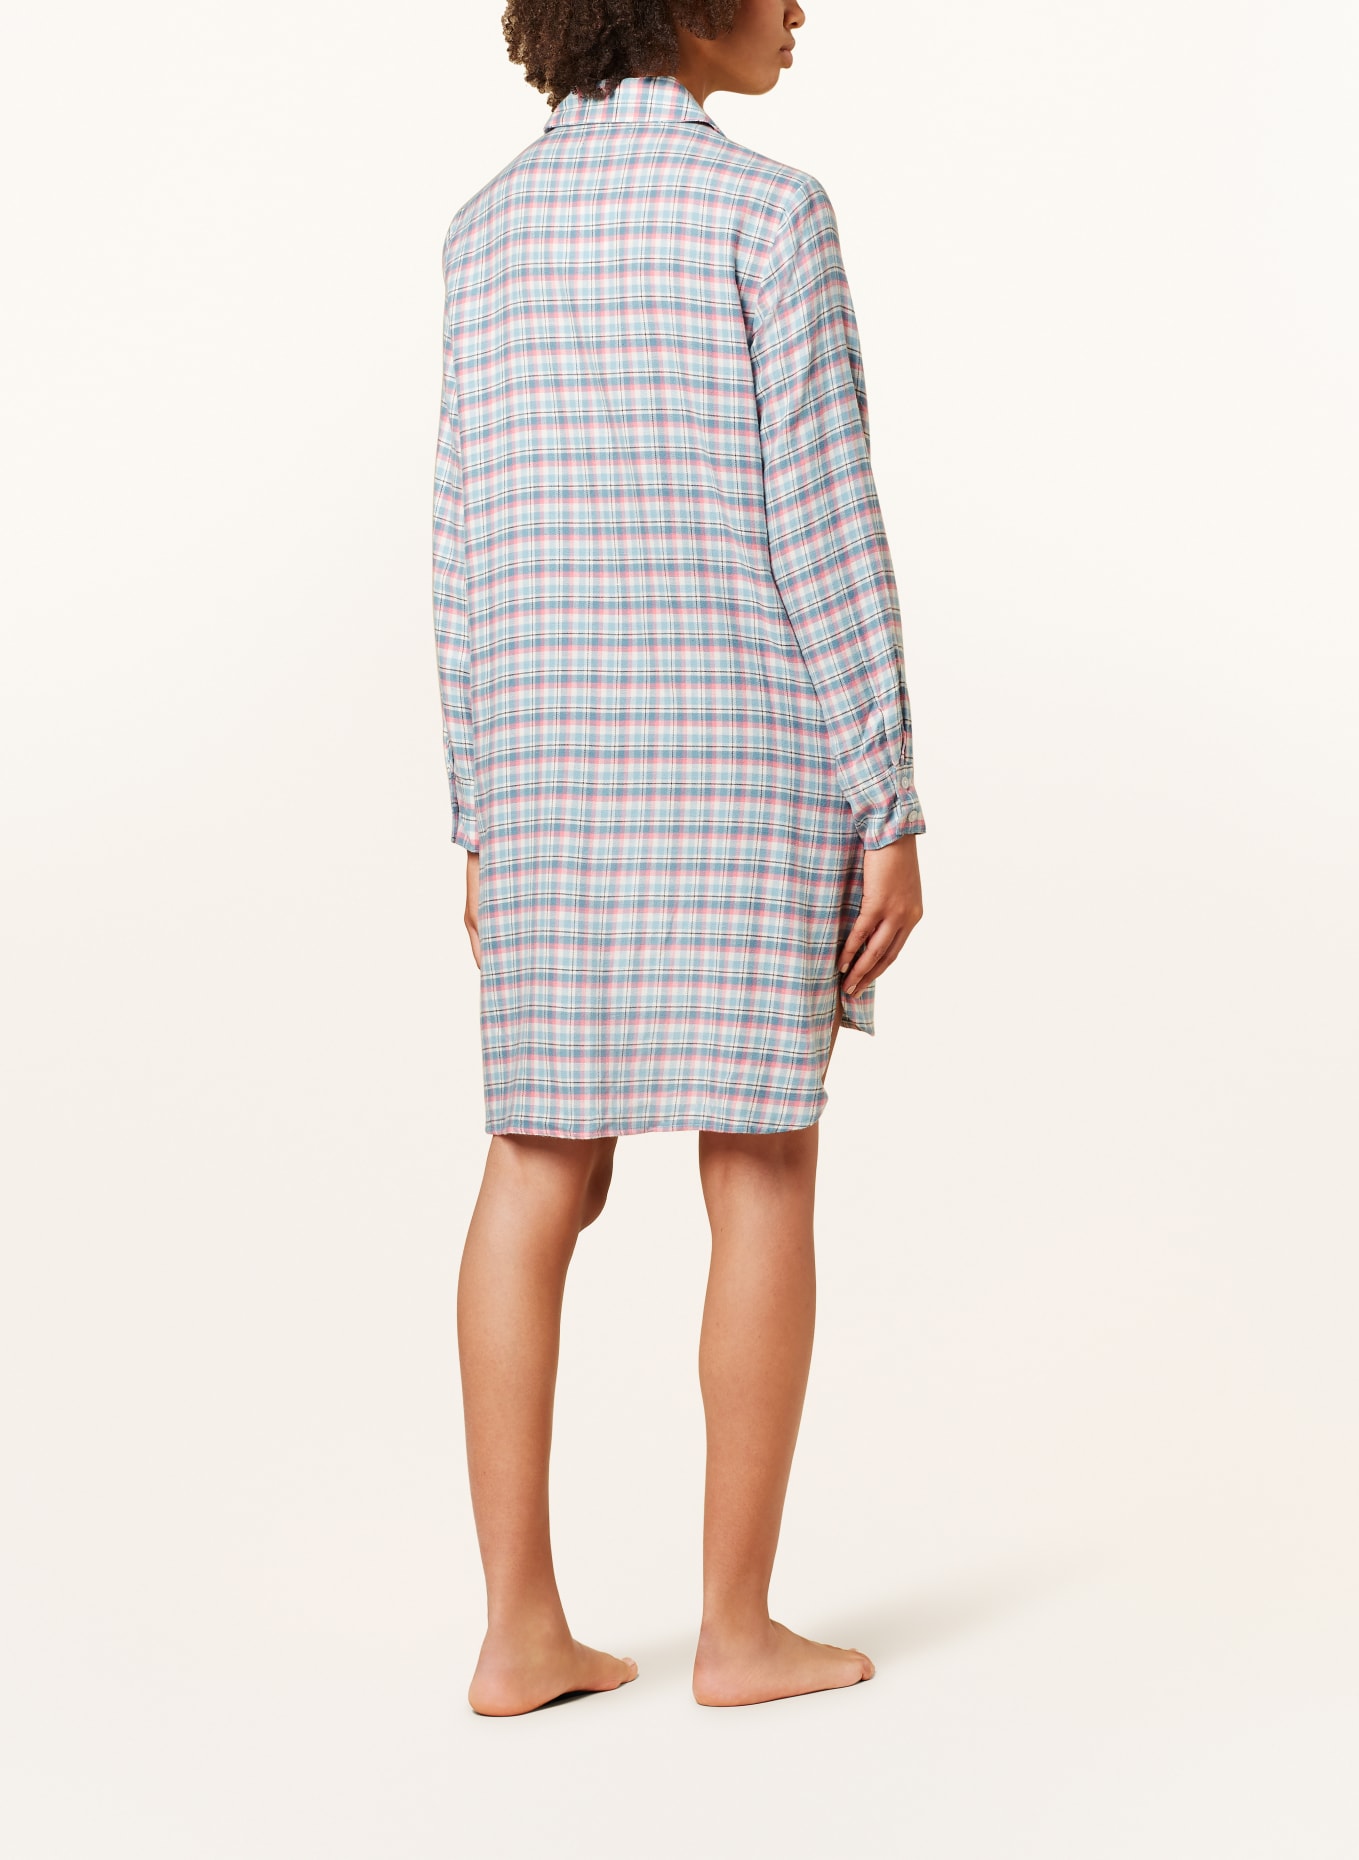 DKNY Nightgown in flannel, Color: LIGHT BLUE/ WHITE/ PINK (Image 3)